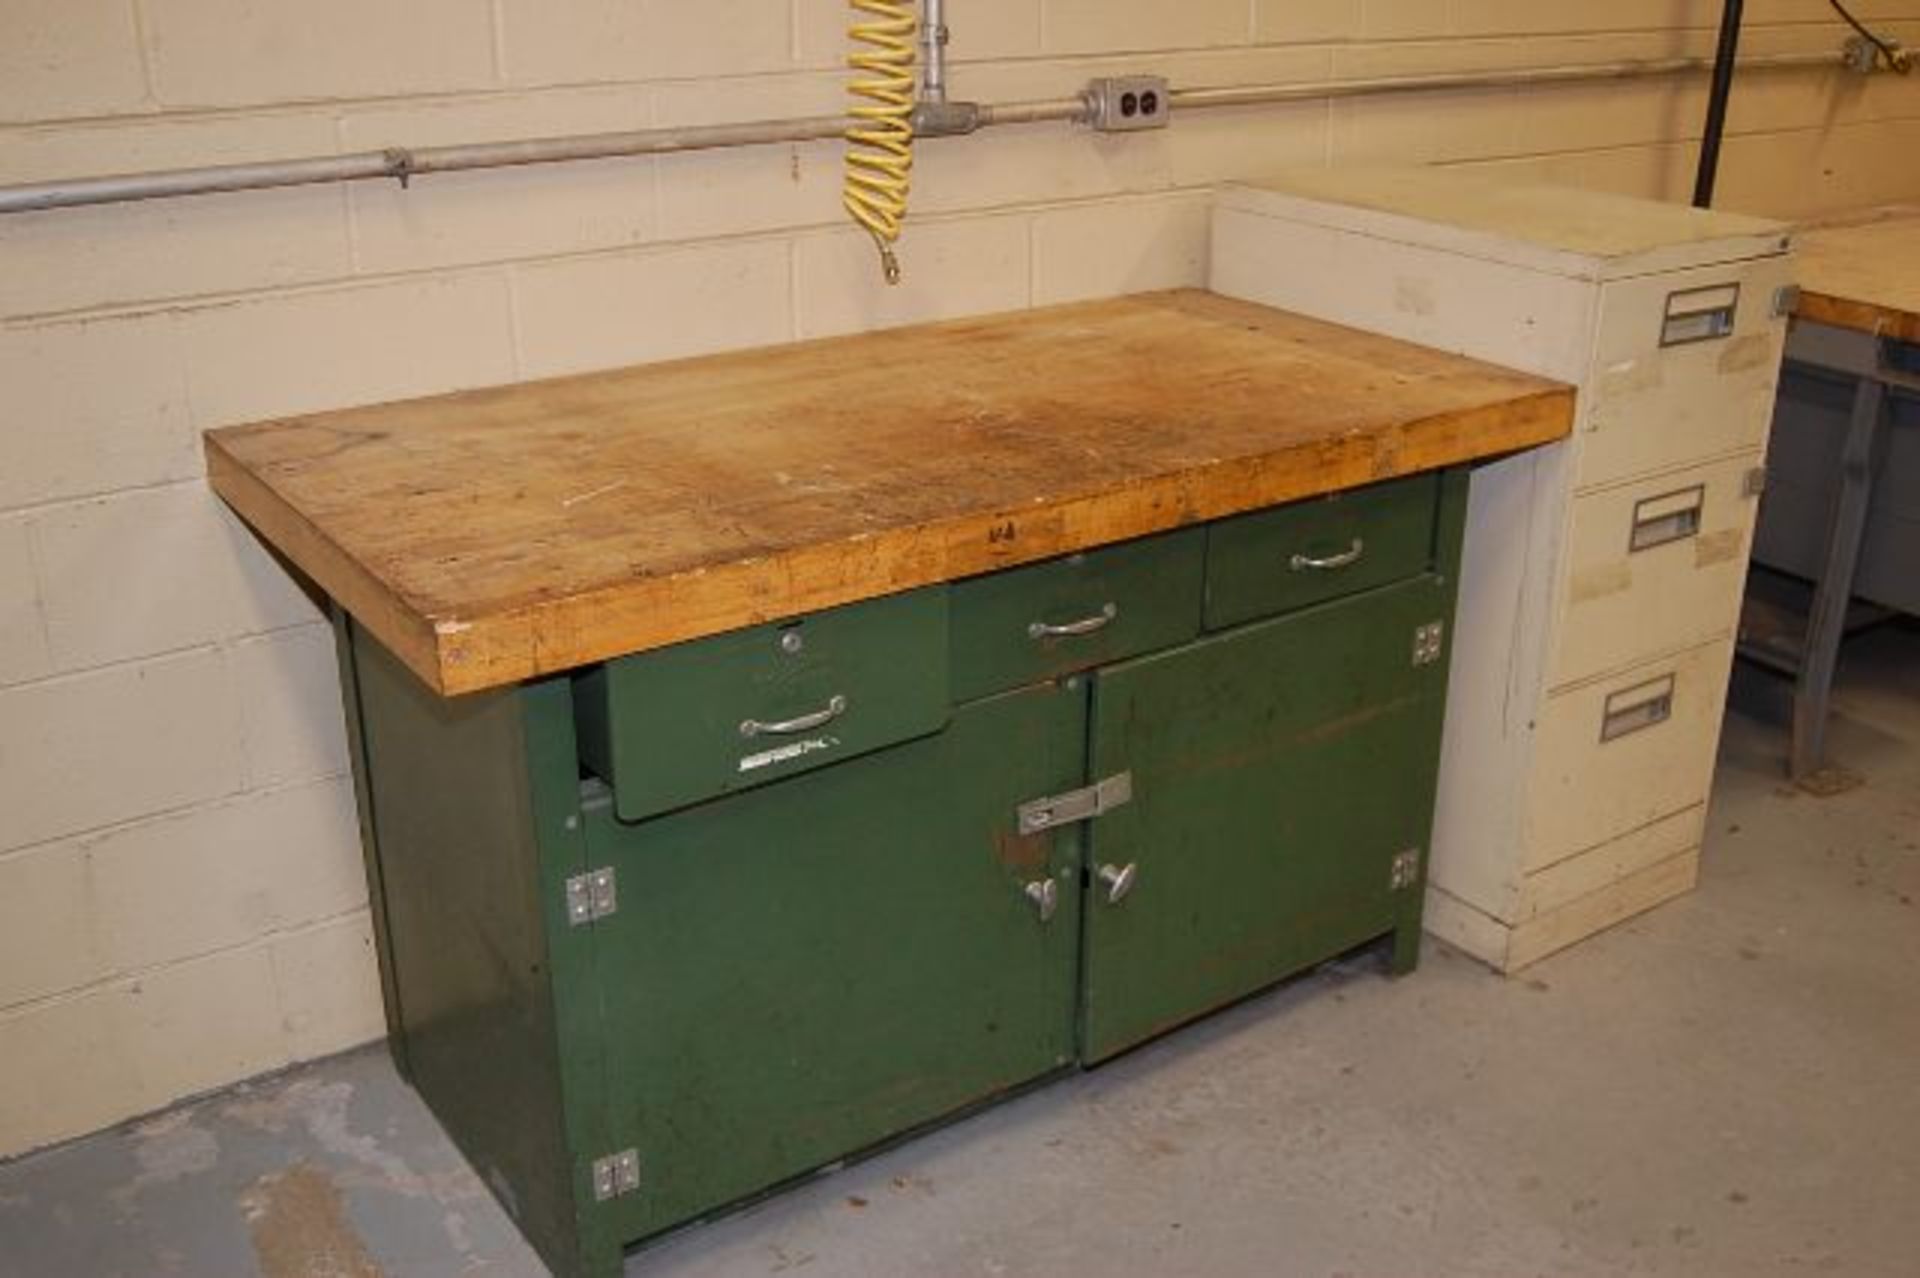 Shop Support Items - Assorted, (13) Work Tables, (3) Hallowell Locker Units, (10) File Cabinets - Image 4 of 4